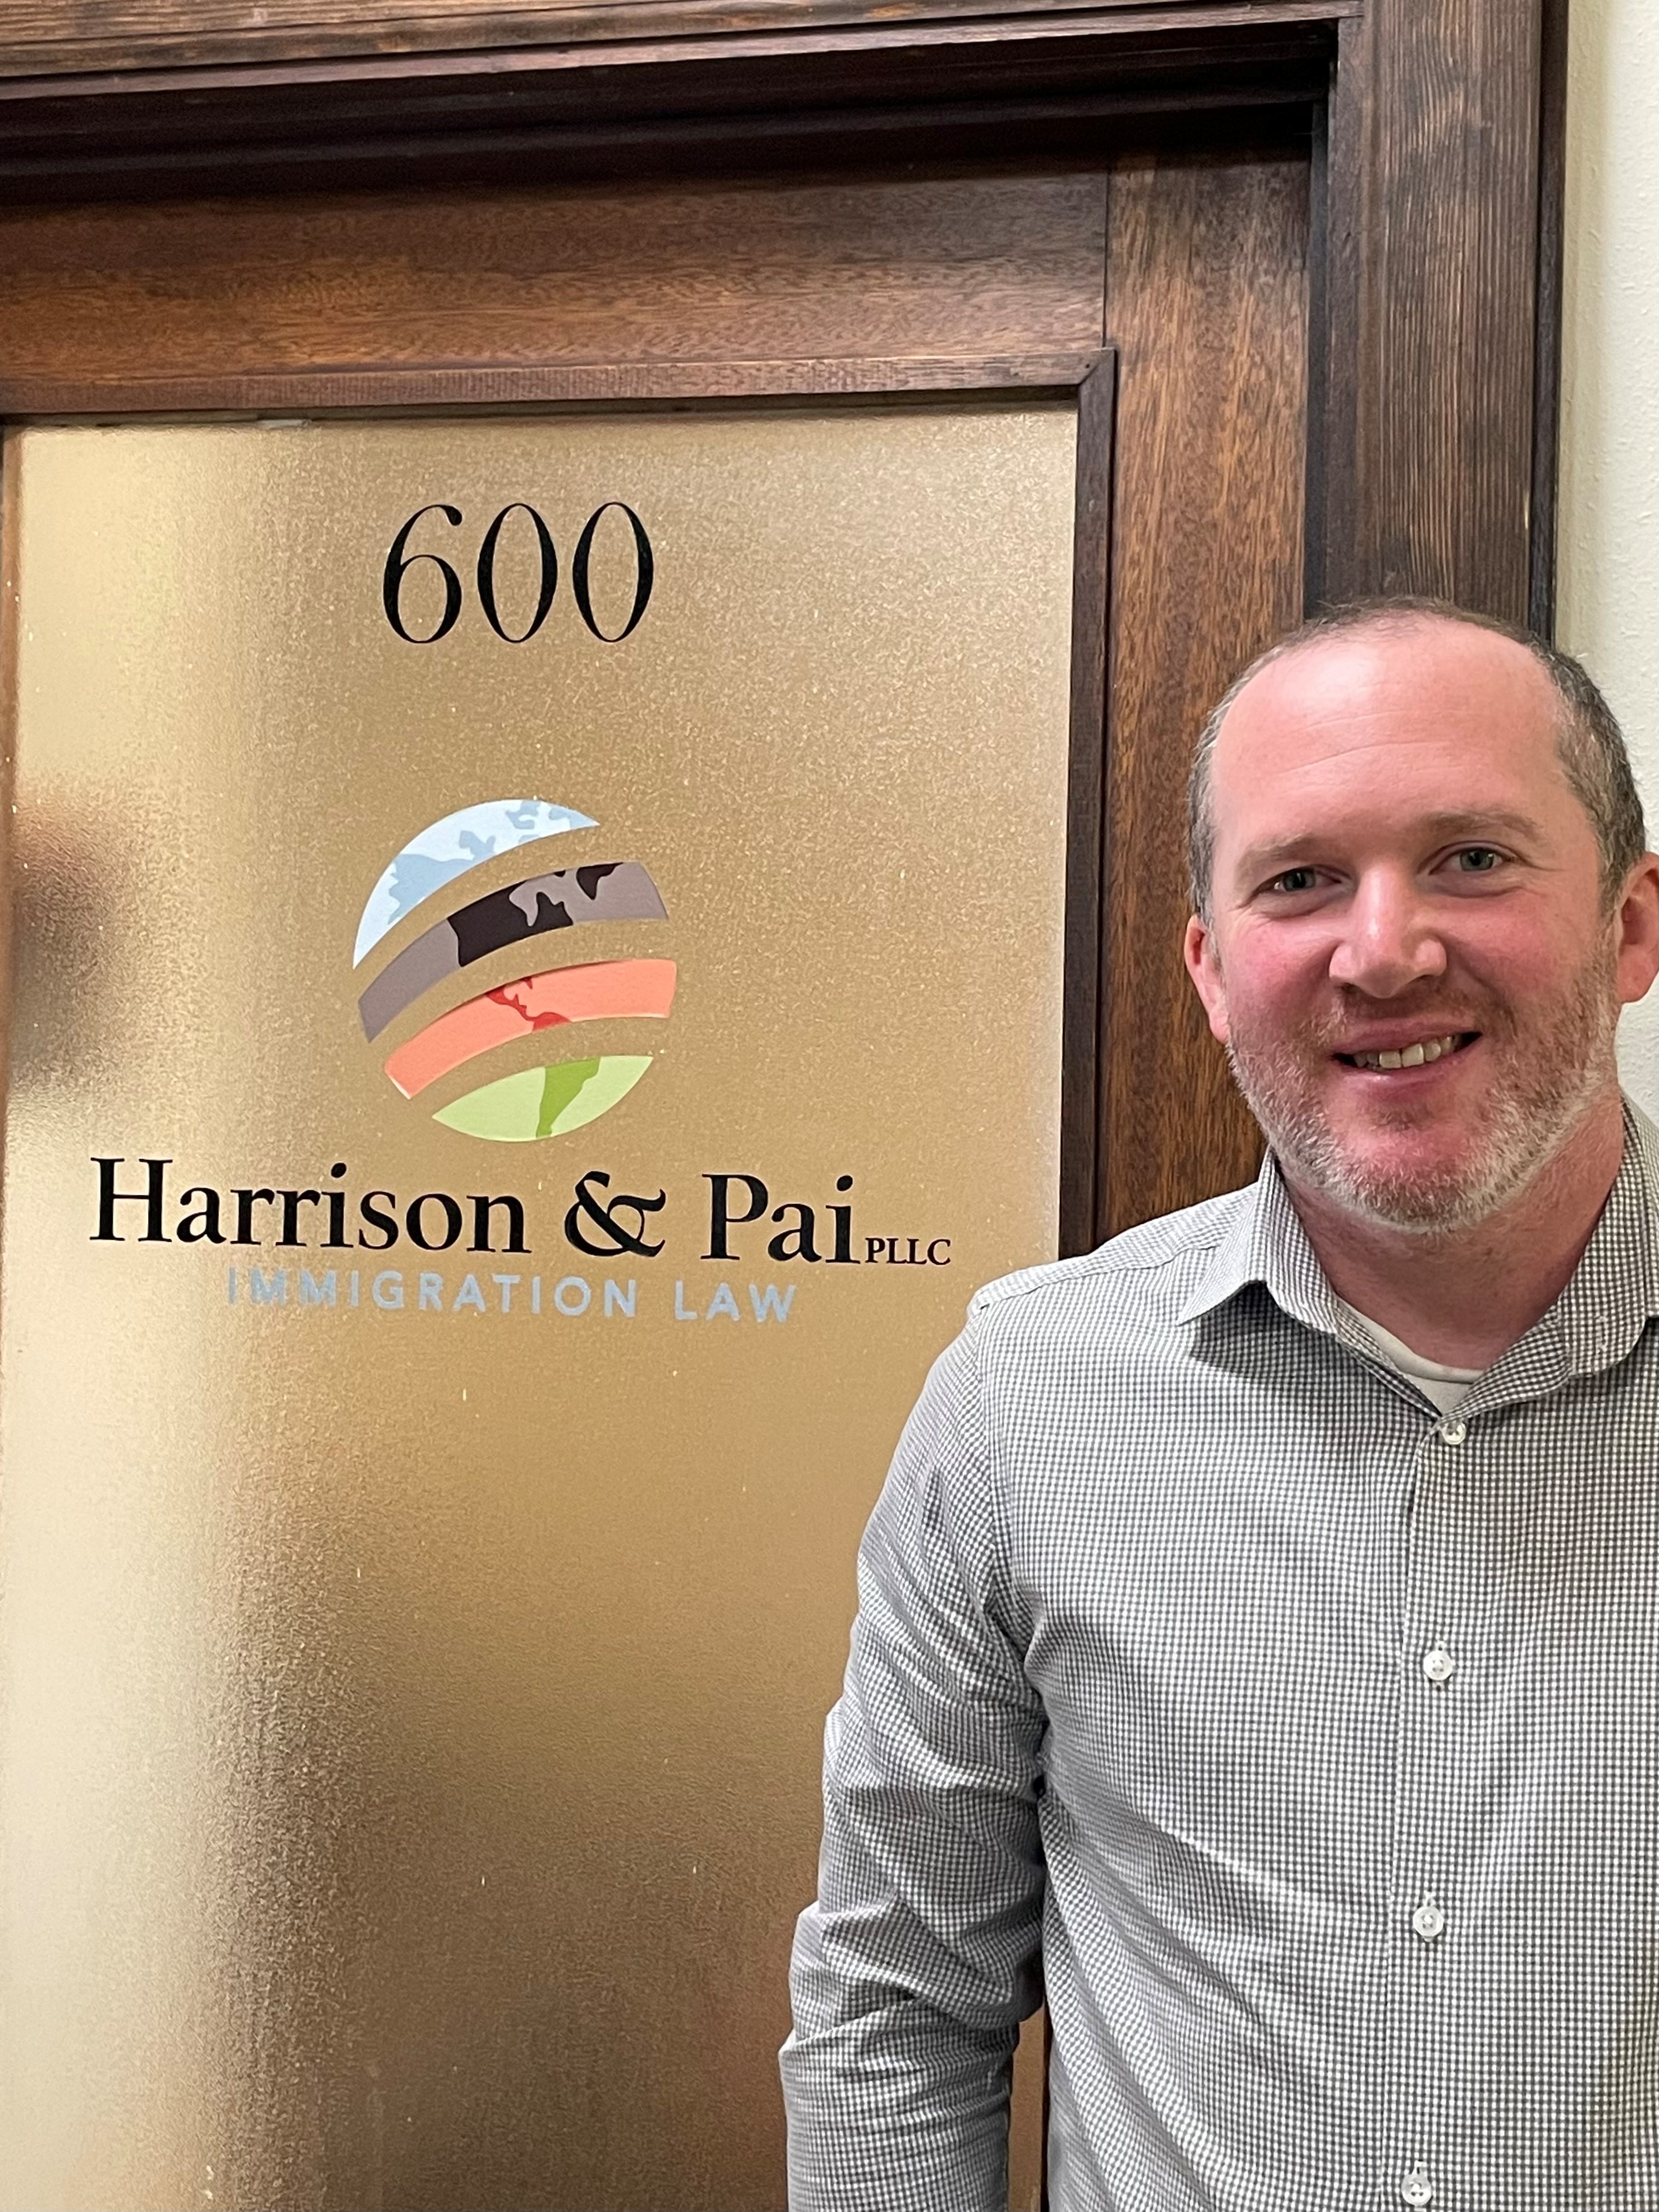 Gabriel Harrison, a white man, standing in front of a door labeled "Harrison & Pai." This is the door to his law firm.